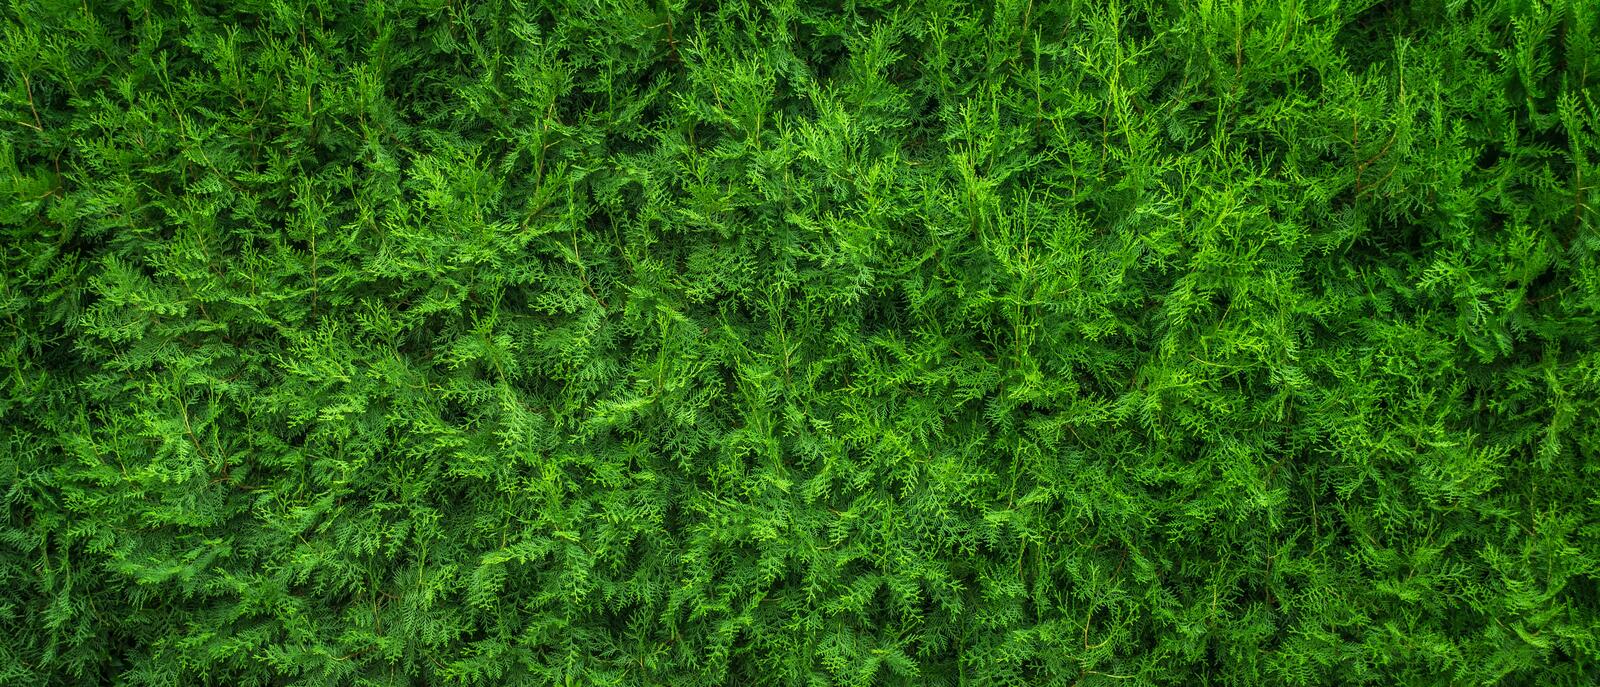 Wallpapers nature grass plant on the desktop